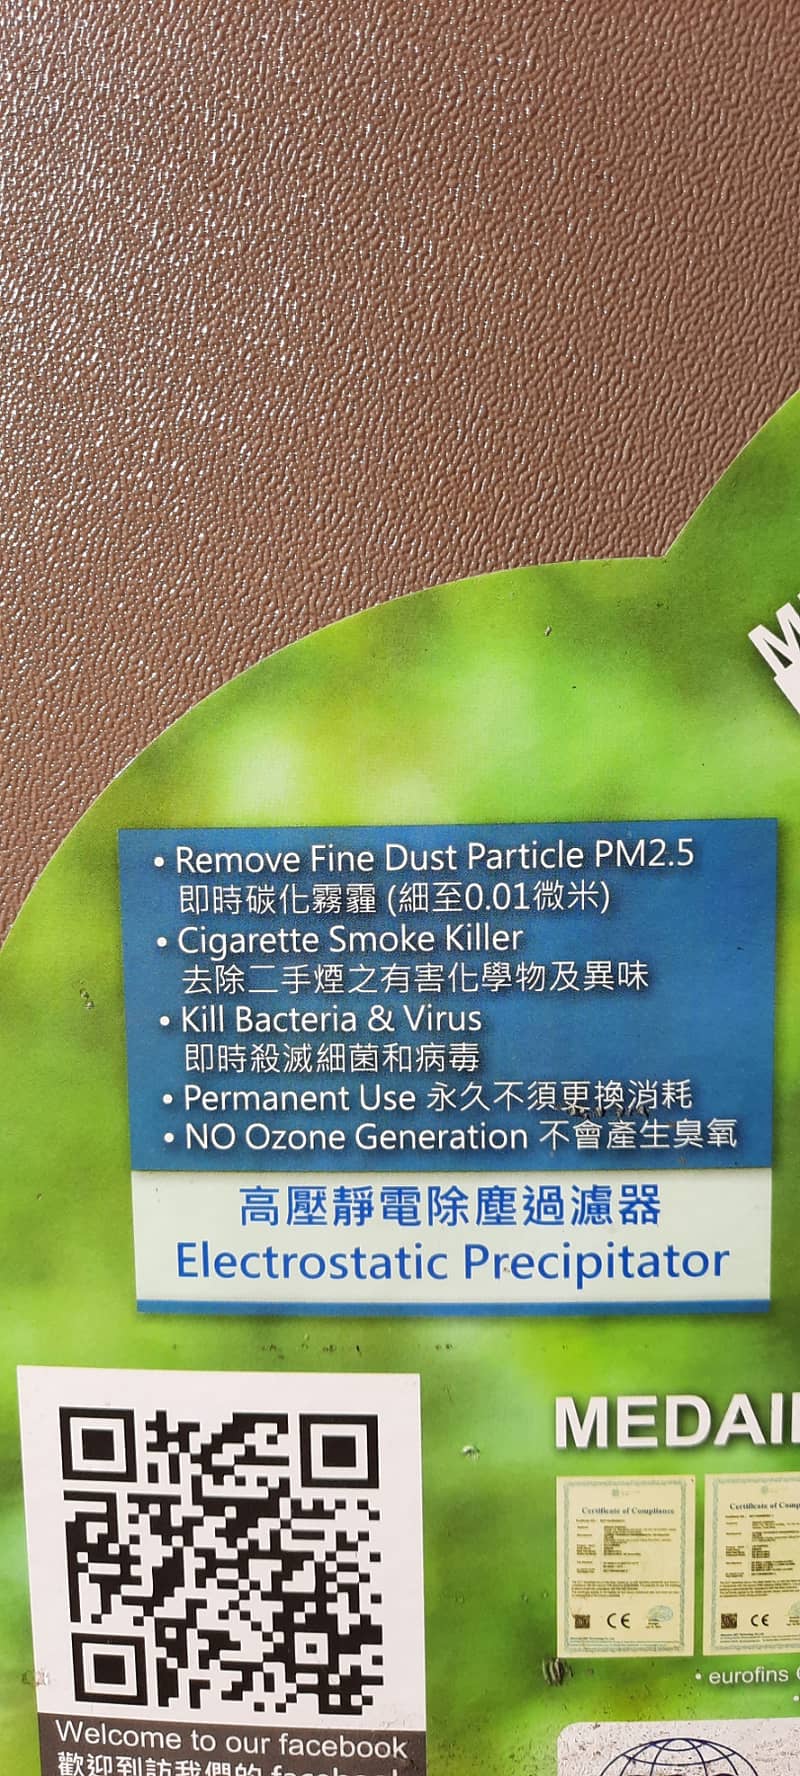 Air Purifier | Pollen Removover | Romover Solution 2